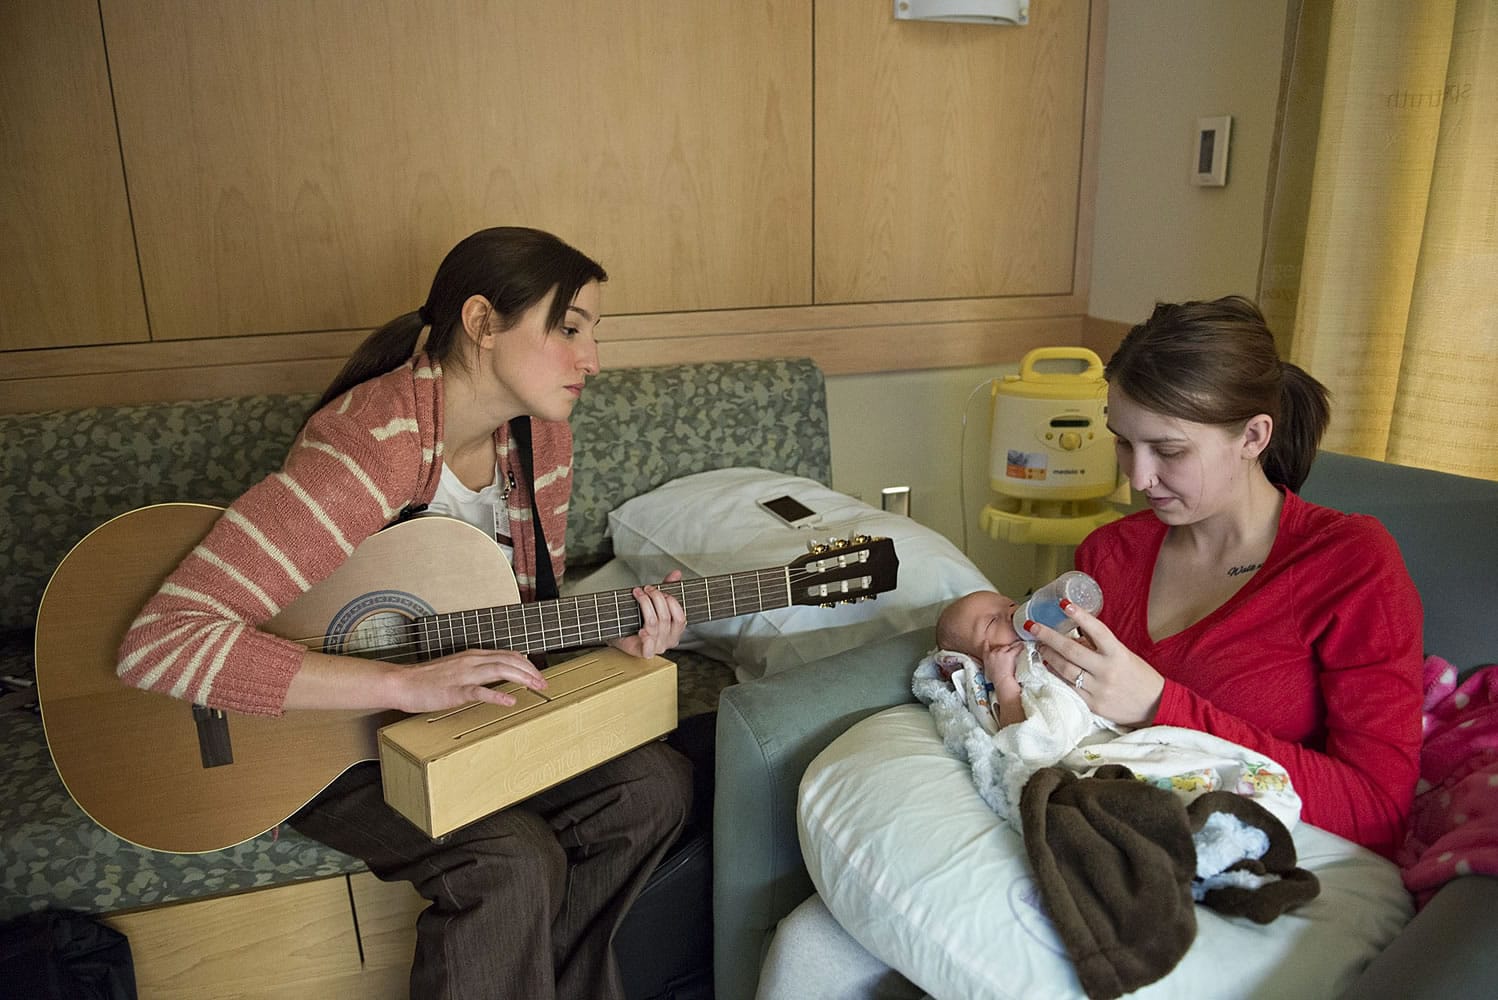 Music therapist Susan Palmieri, left, taps on a Gato box instrument as Haley Giese feeds her newborn son, Miles, a bottle Tuesday afternoon in PeaceHealth Southwest Medical Center&#039;s neonatal intensive care unit. Palmieri uses the Gato box to help Miles pace his sucking while feeding.